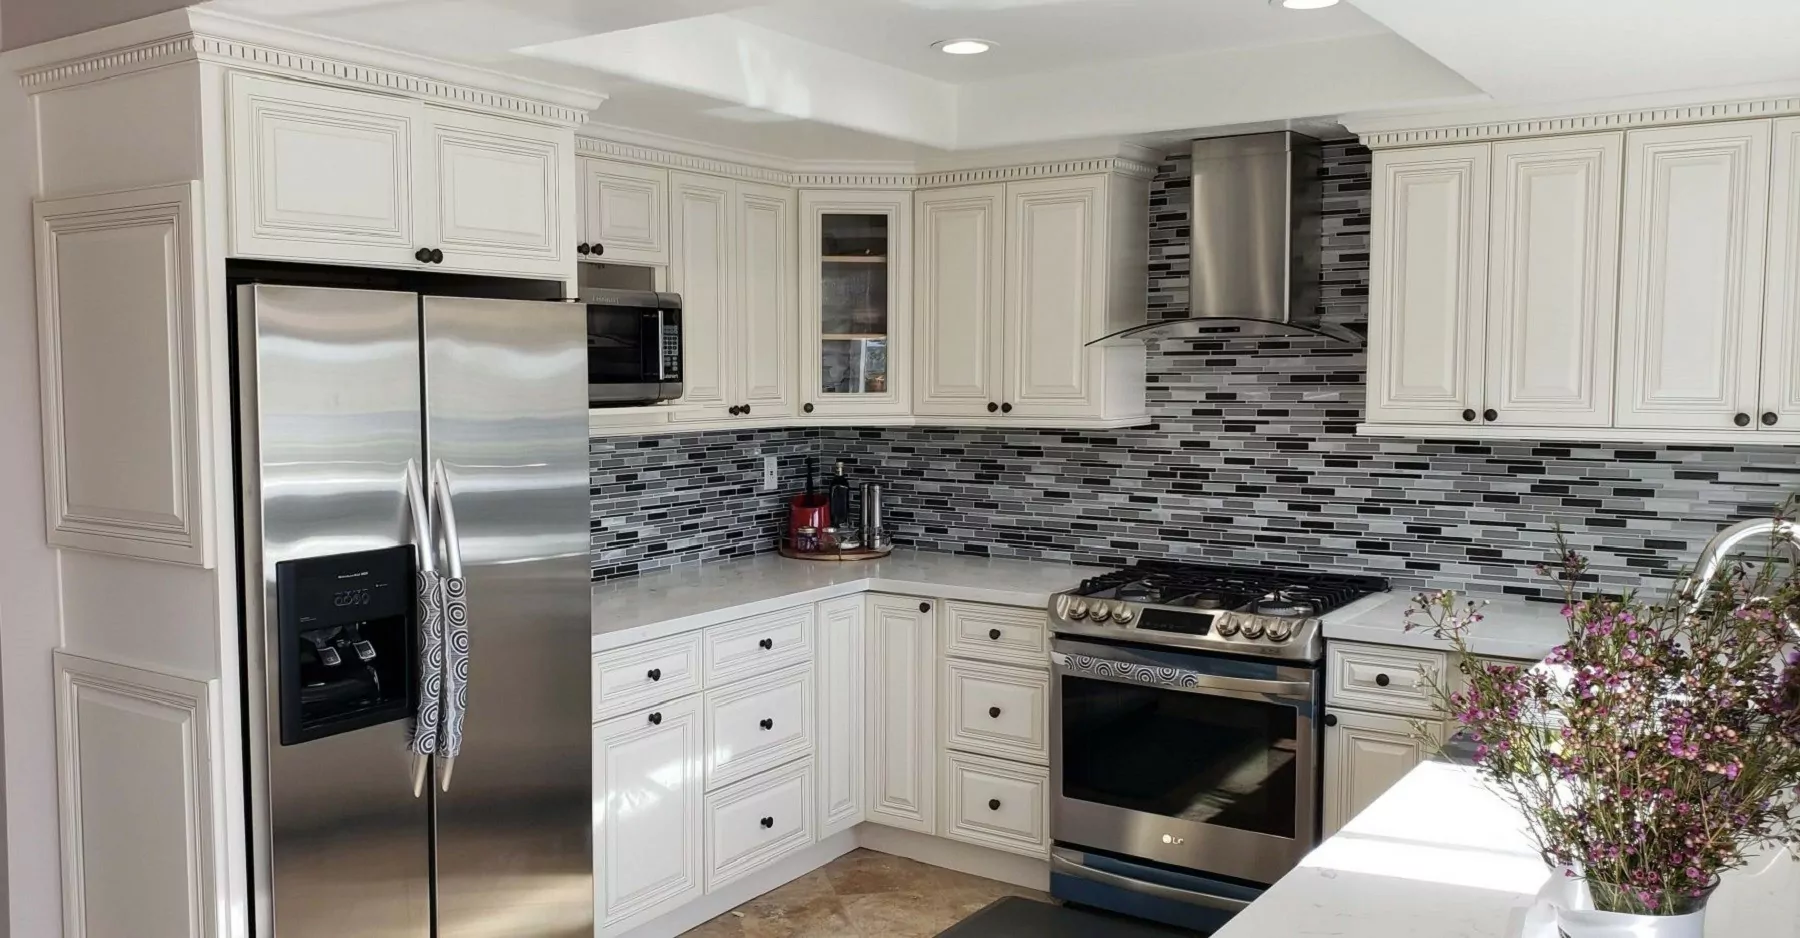 Groysman Construction Remodeling | Clairemont, San Diego